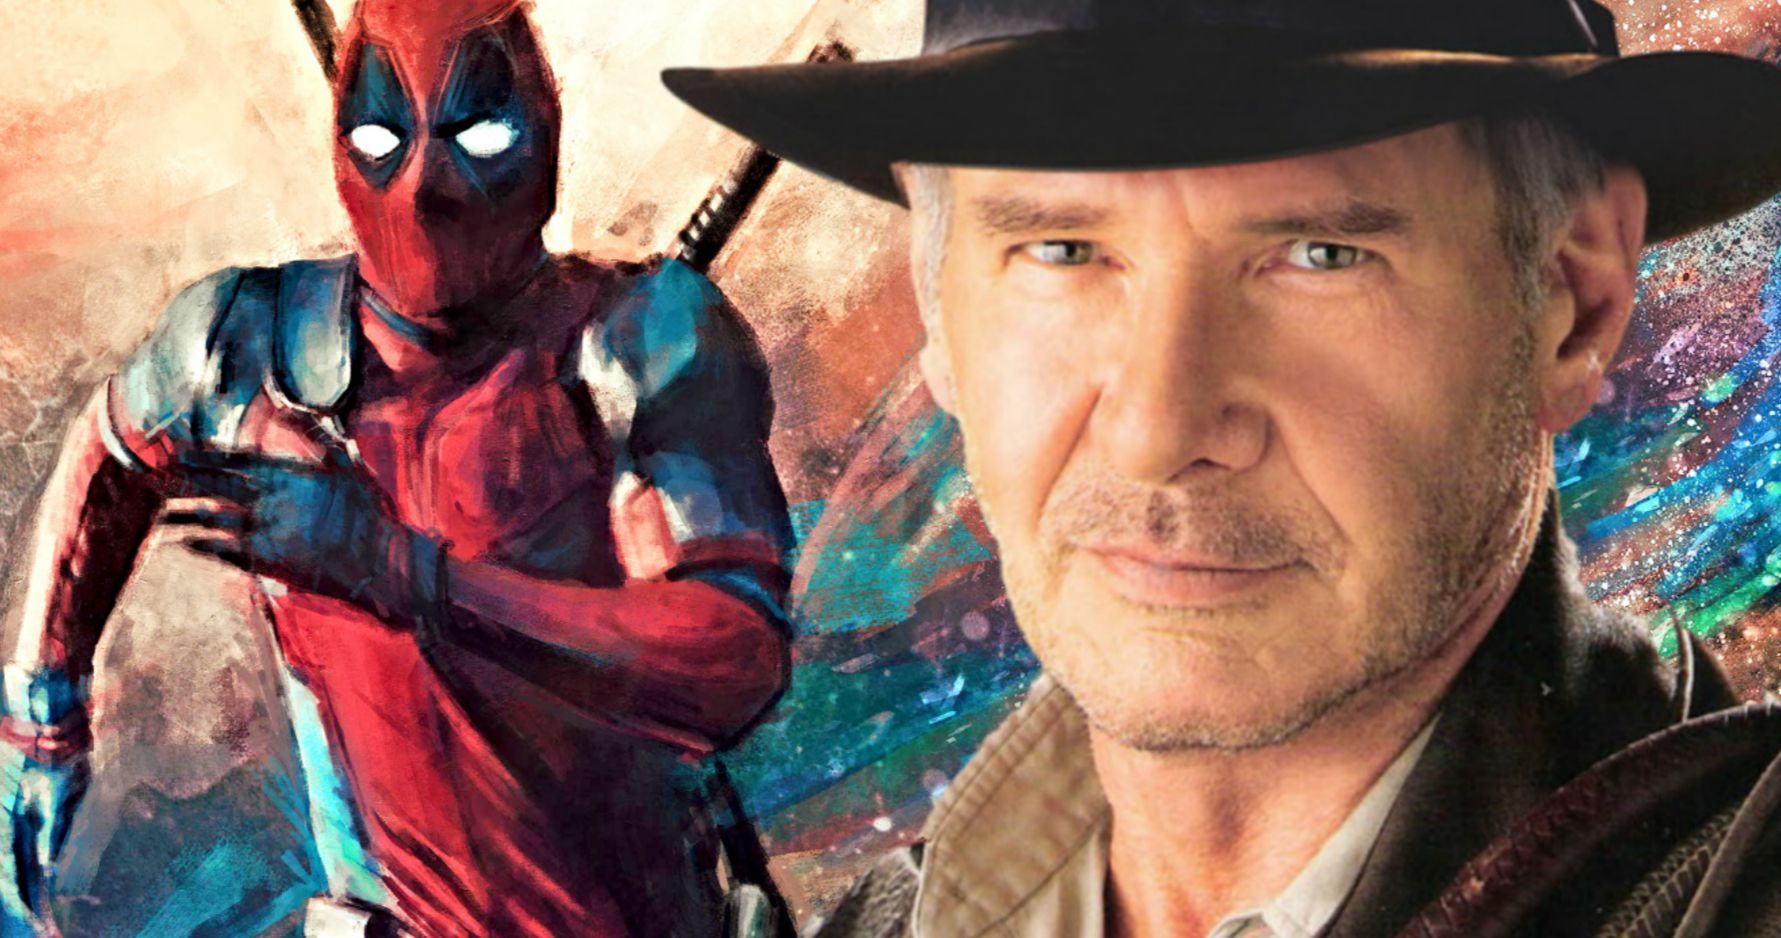 Indiana Jones Easter Egg Hiding in Deadpool 2 Pointed Out by Ryan Reynolds